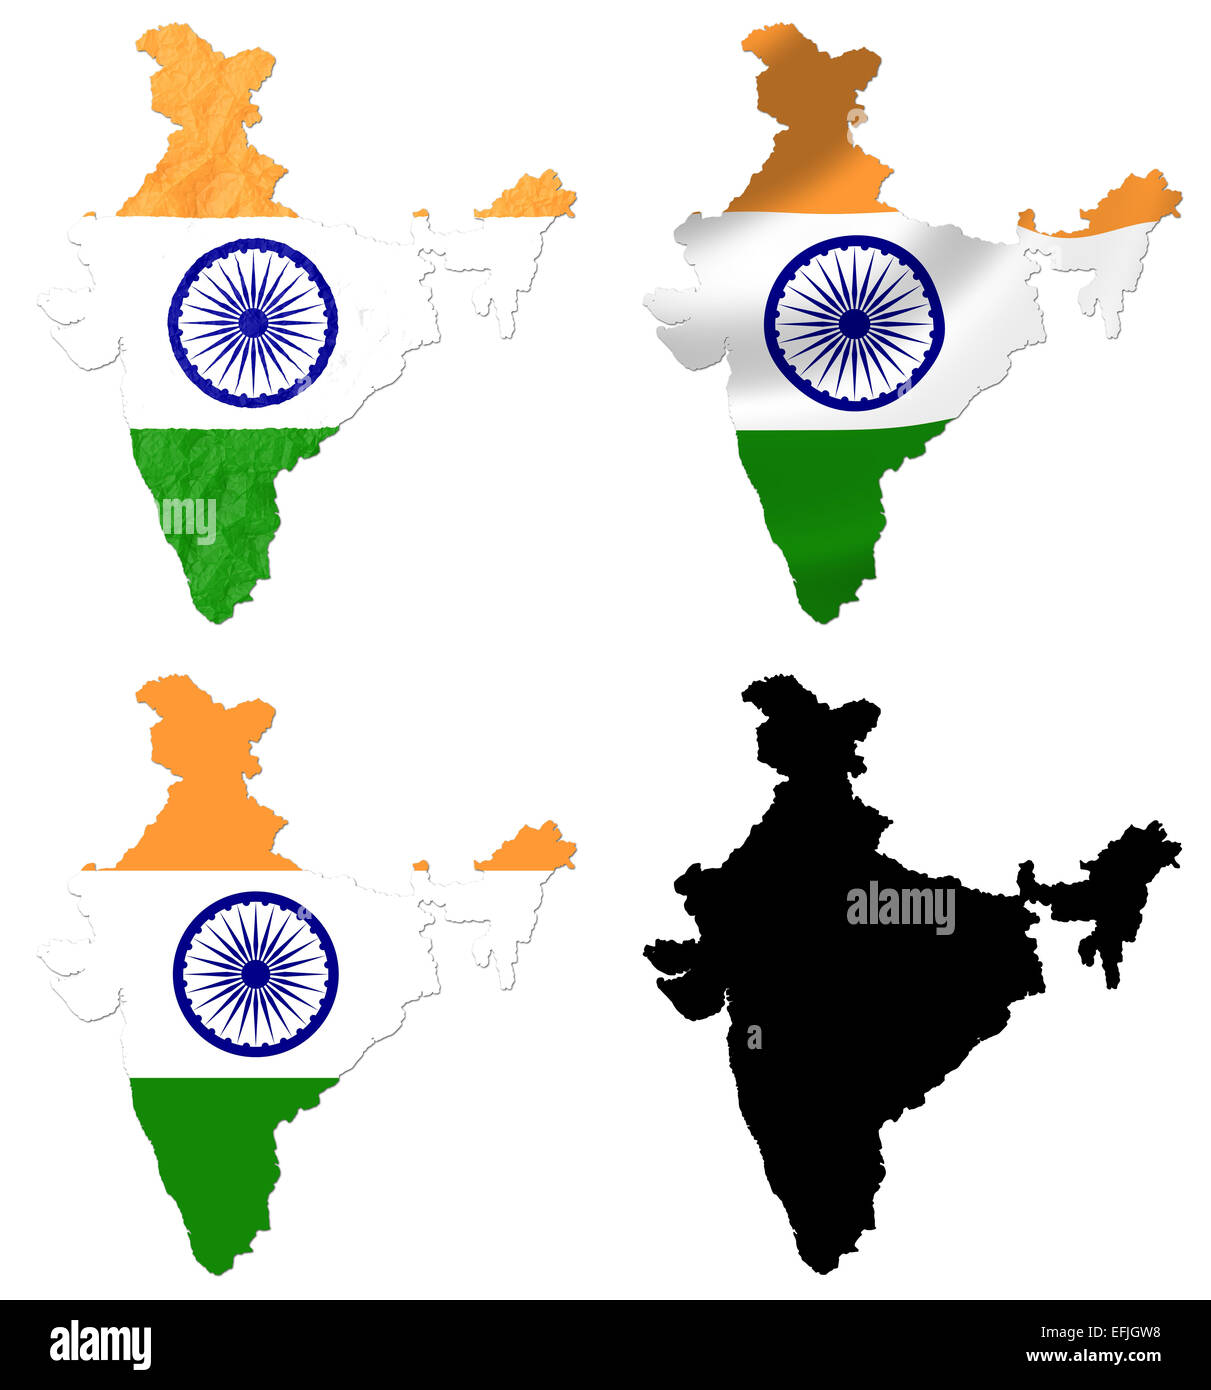 India flag over map Stock Photo